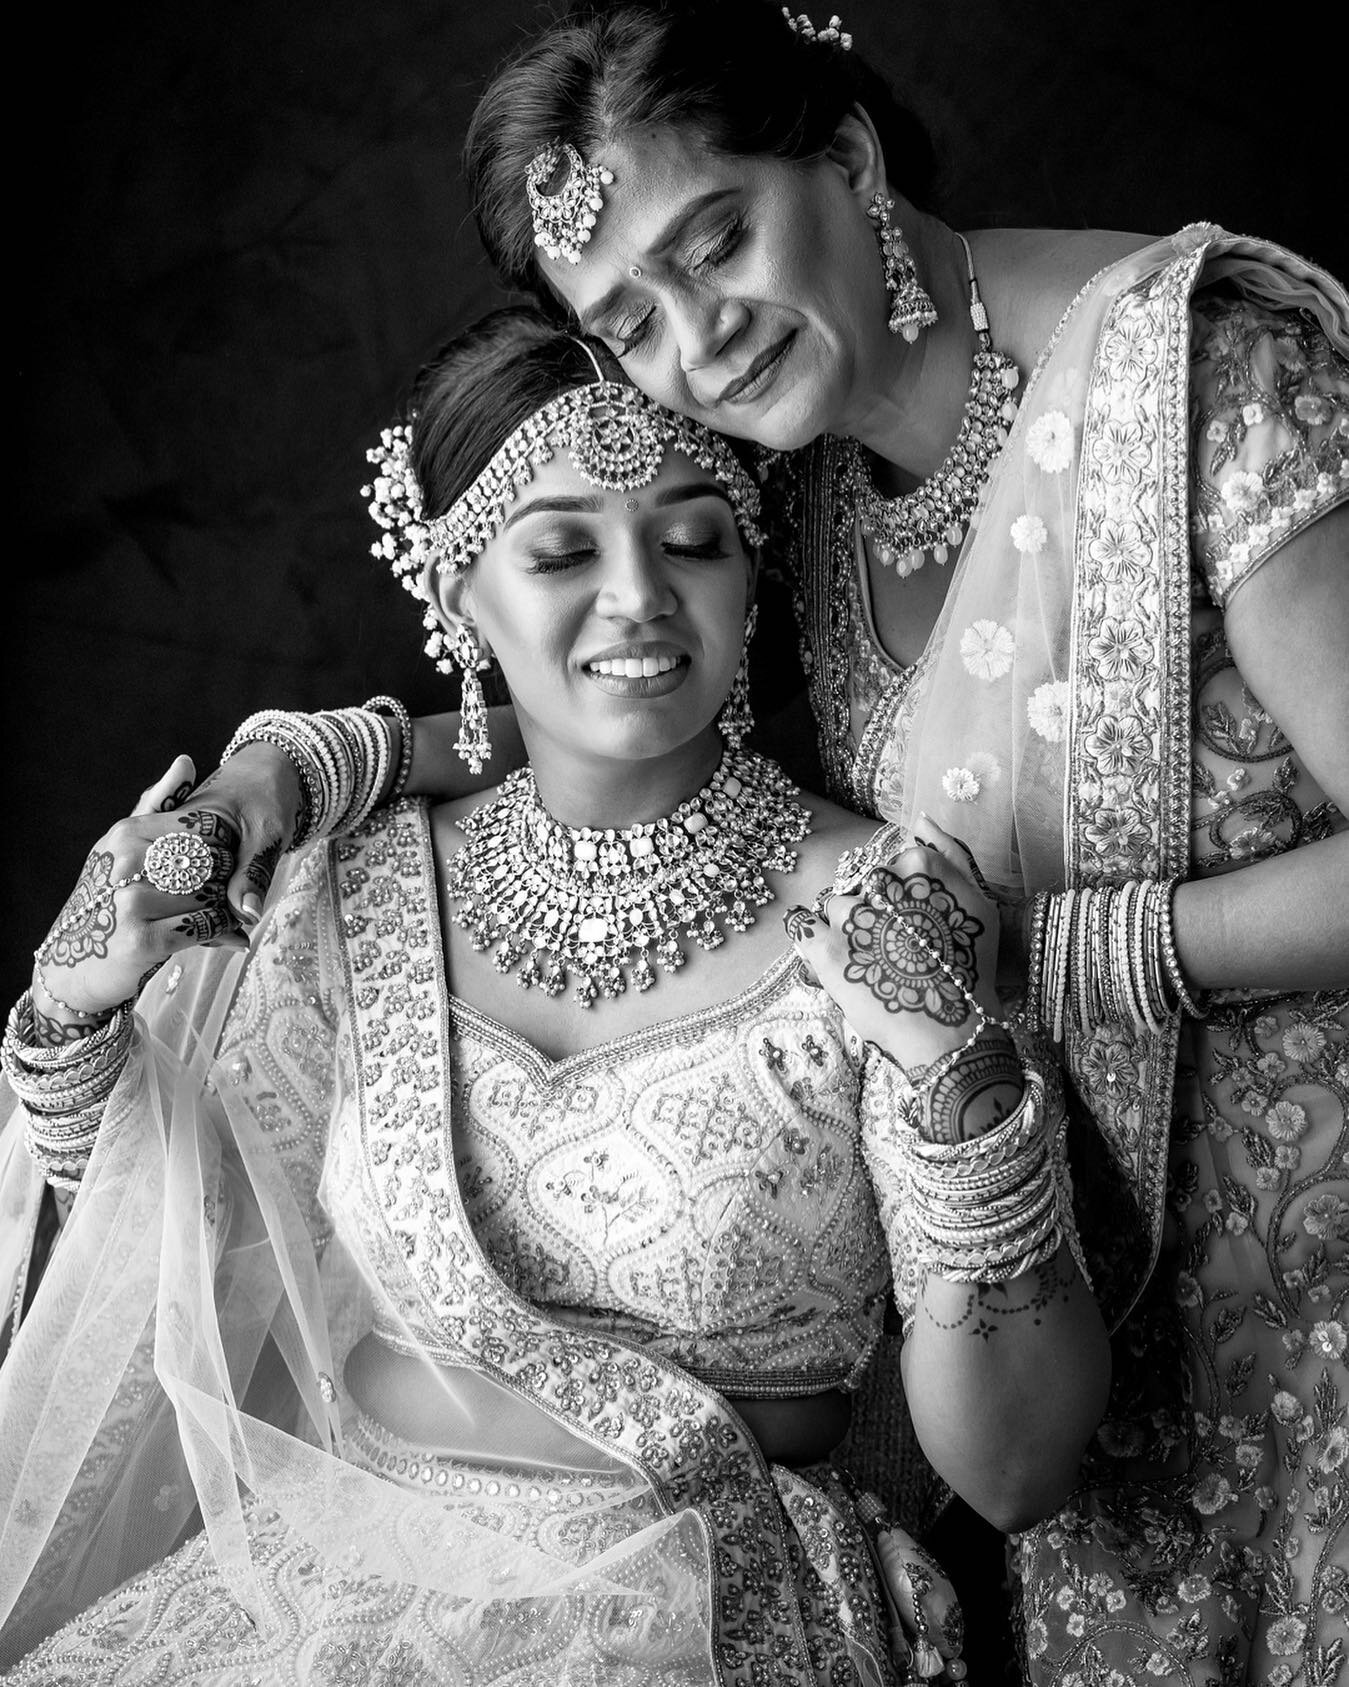 &ldquo;For all the things my hands have held, the best by far is you&rdquo;
.
.
Thank you Kerisa and Pritum for trusting us to capture your gorgeous wedding memories!
.
.

Apresh &amp; Bharti Chavda
Apresh Chavda Photography
www.apreshchavda.com
+447